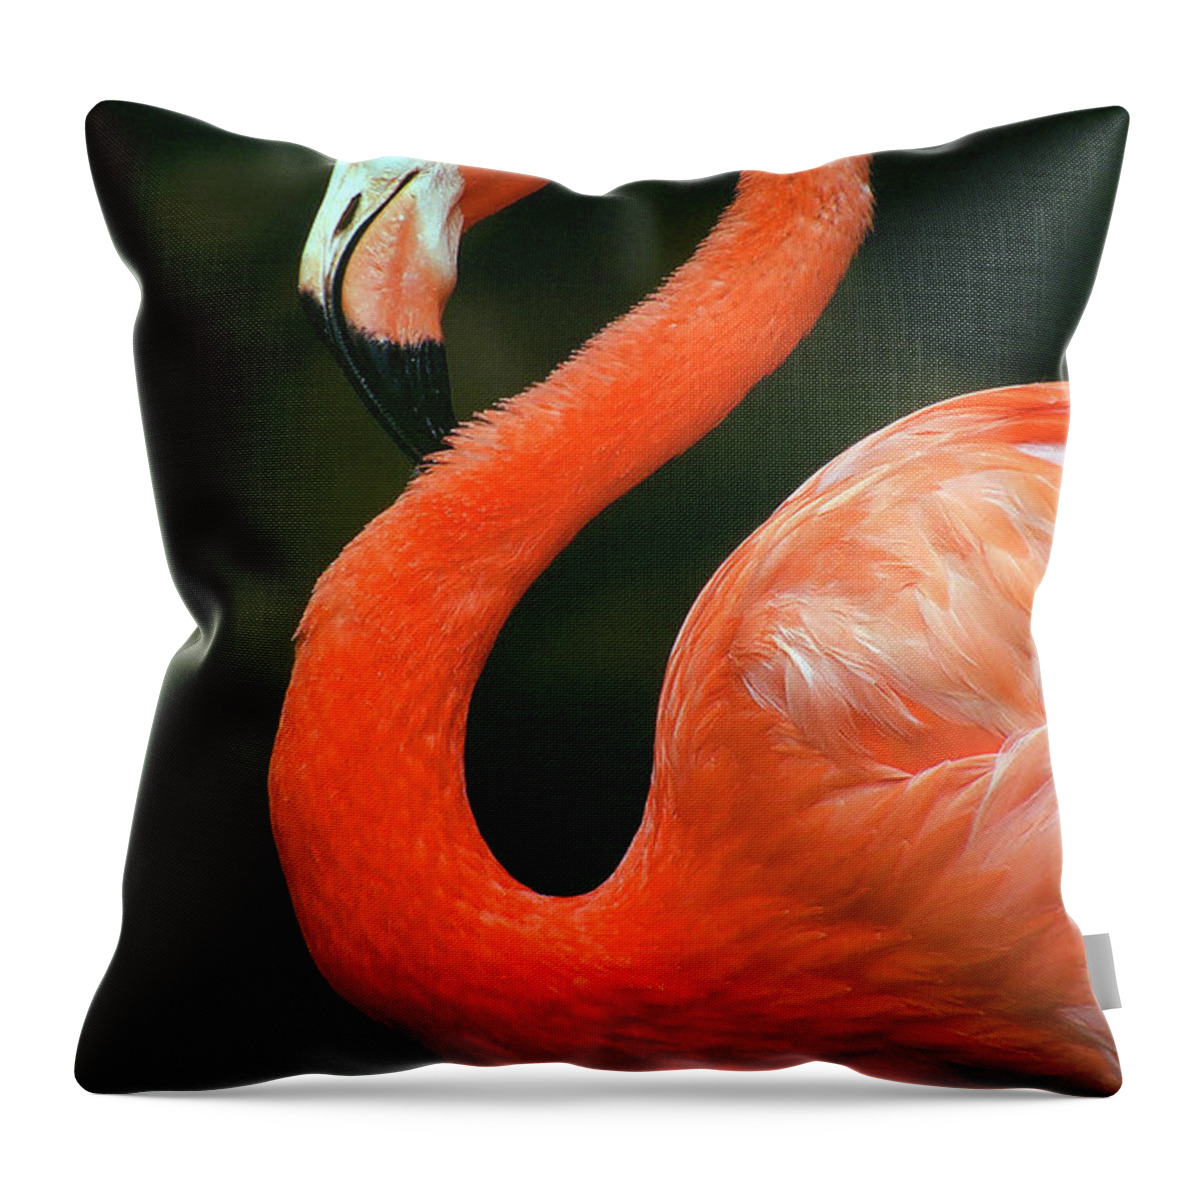 Flamingo Throw Pillow featuring the photograph Flamingo by Ted Keller